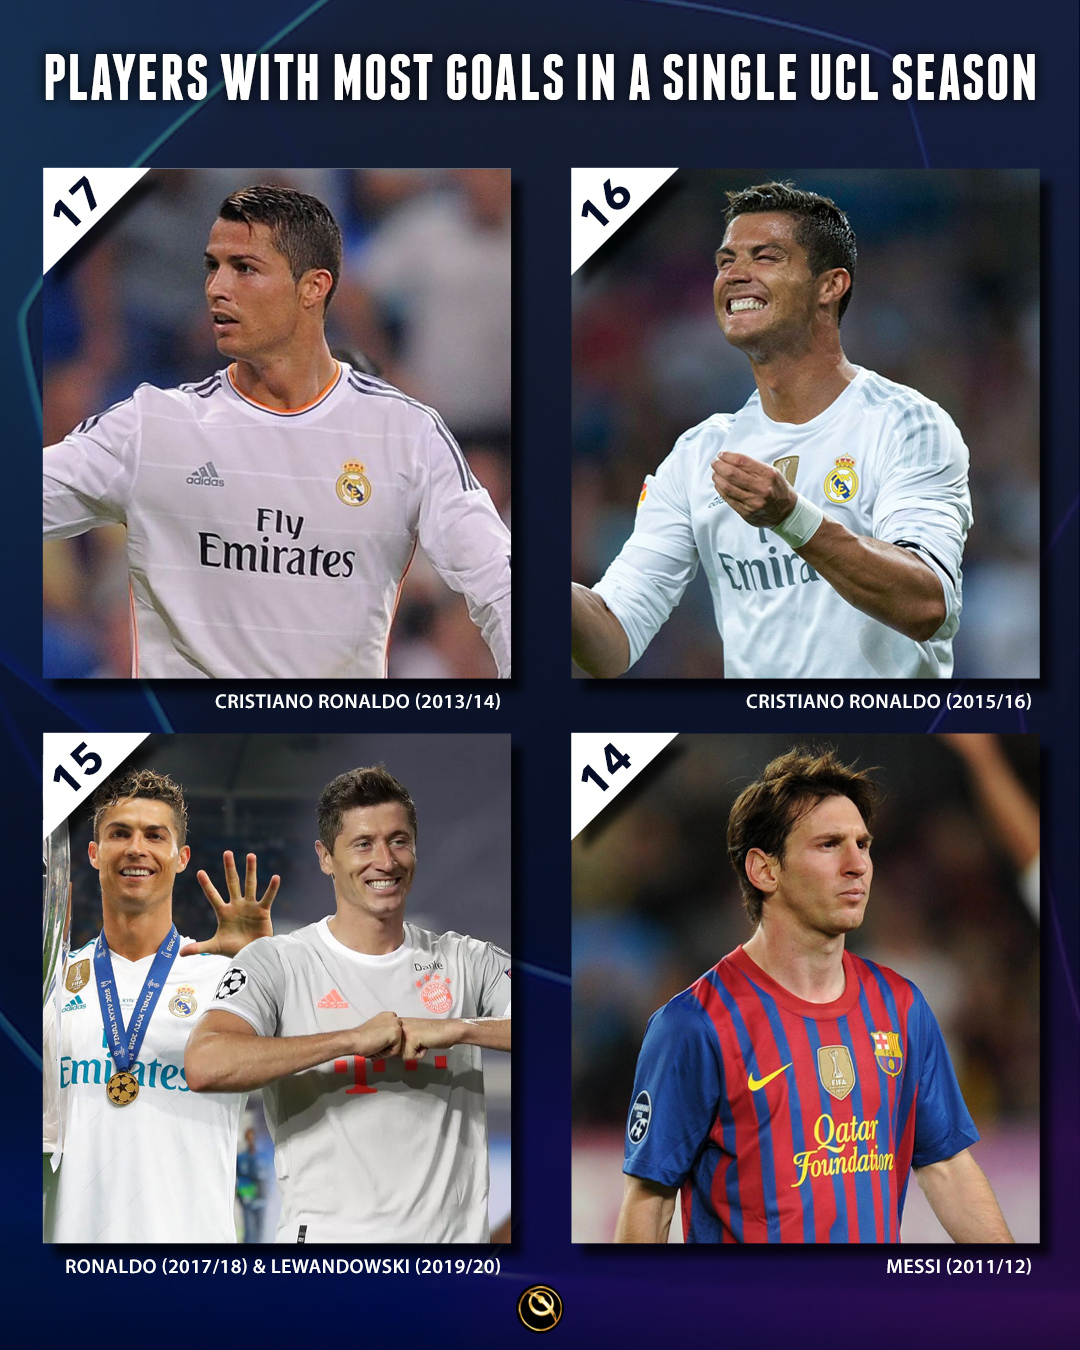 Most Champions League Goals in a Season